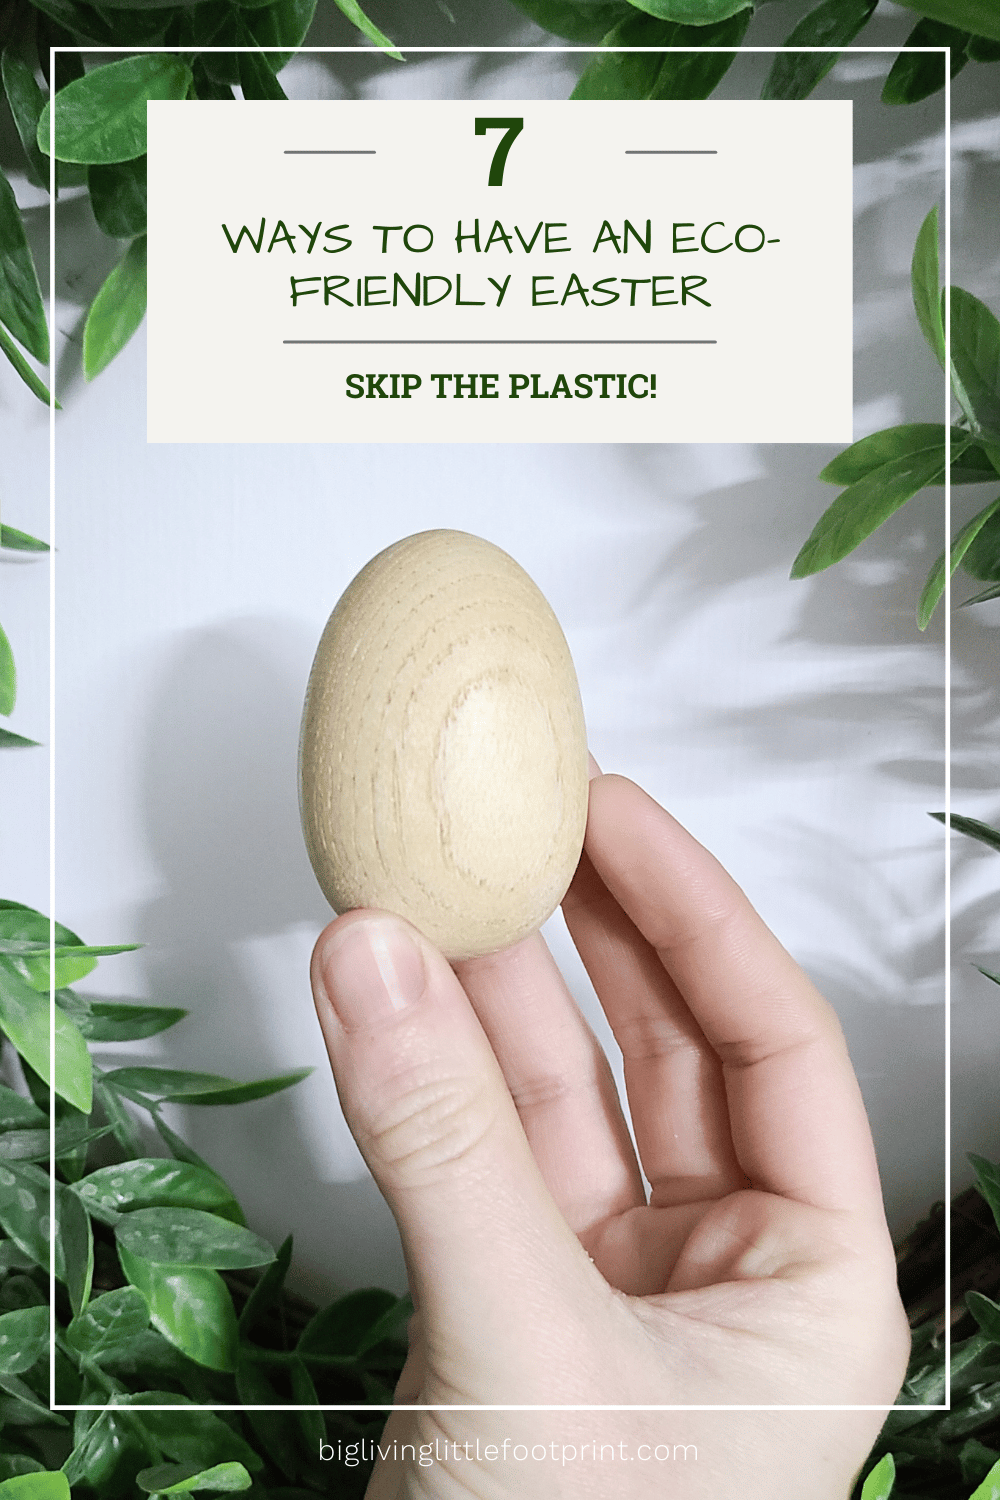 Skip the Plastic – 7 Ways To Have An Eco-friendly Easter